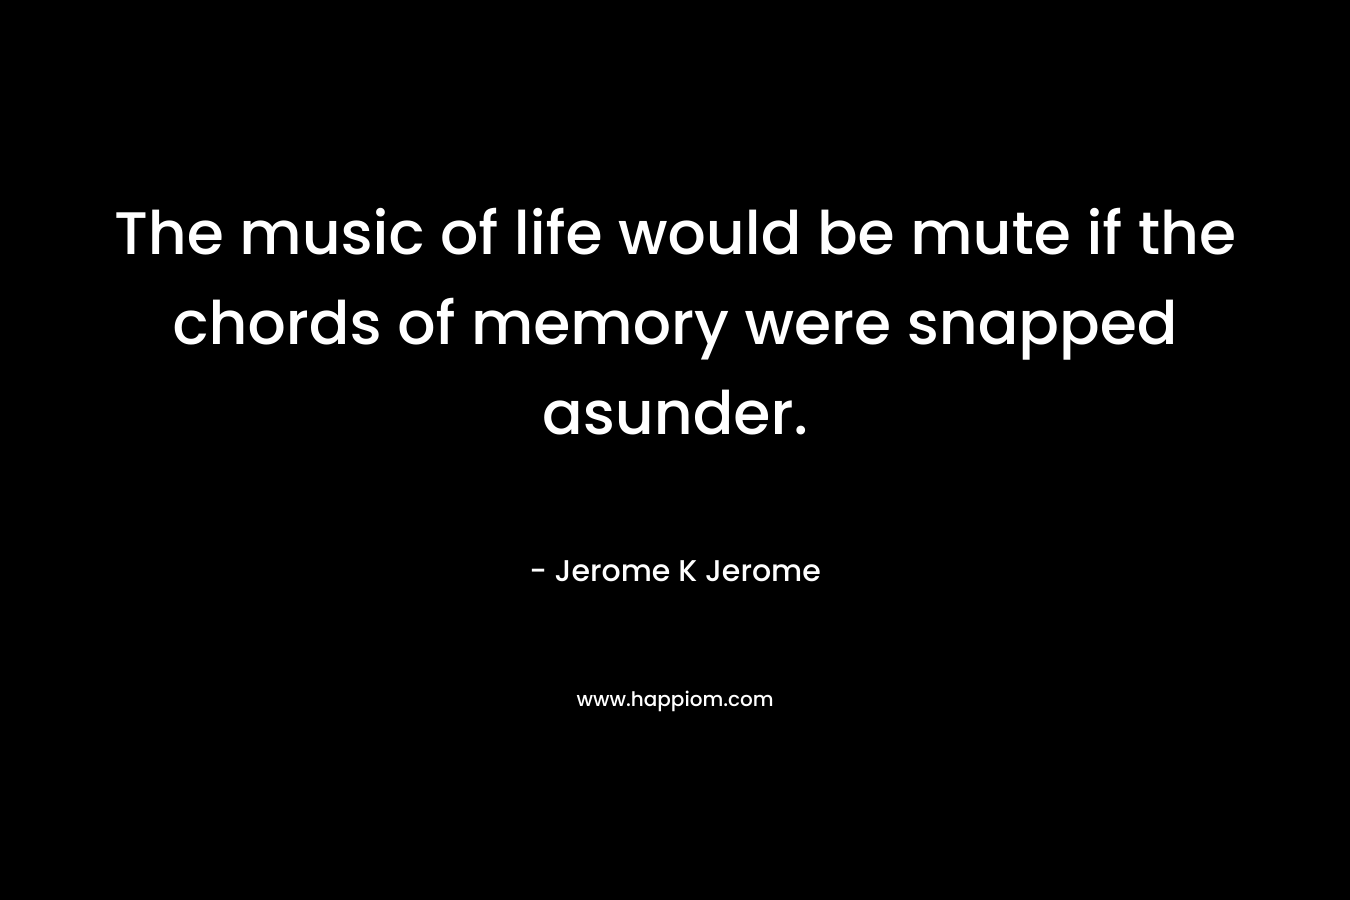 The music of life would be mute if the chords of memory were snapped asunder. – Jerome K Jerome